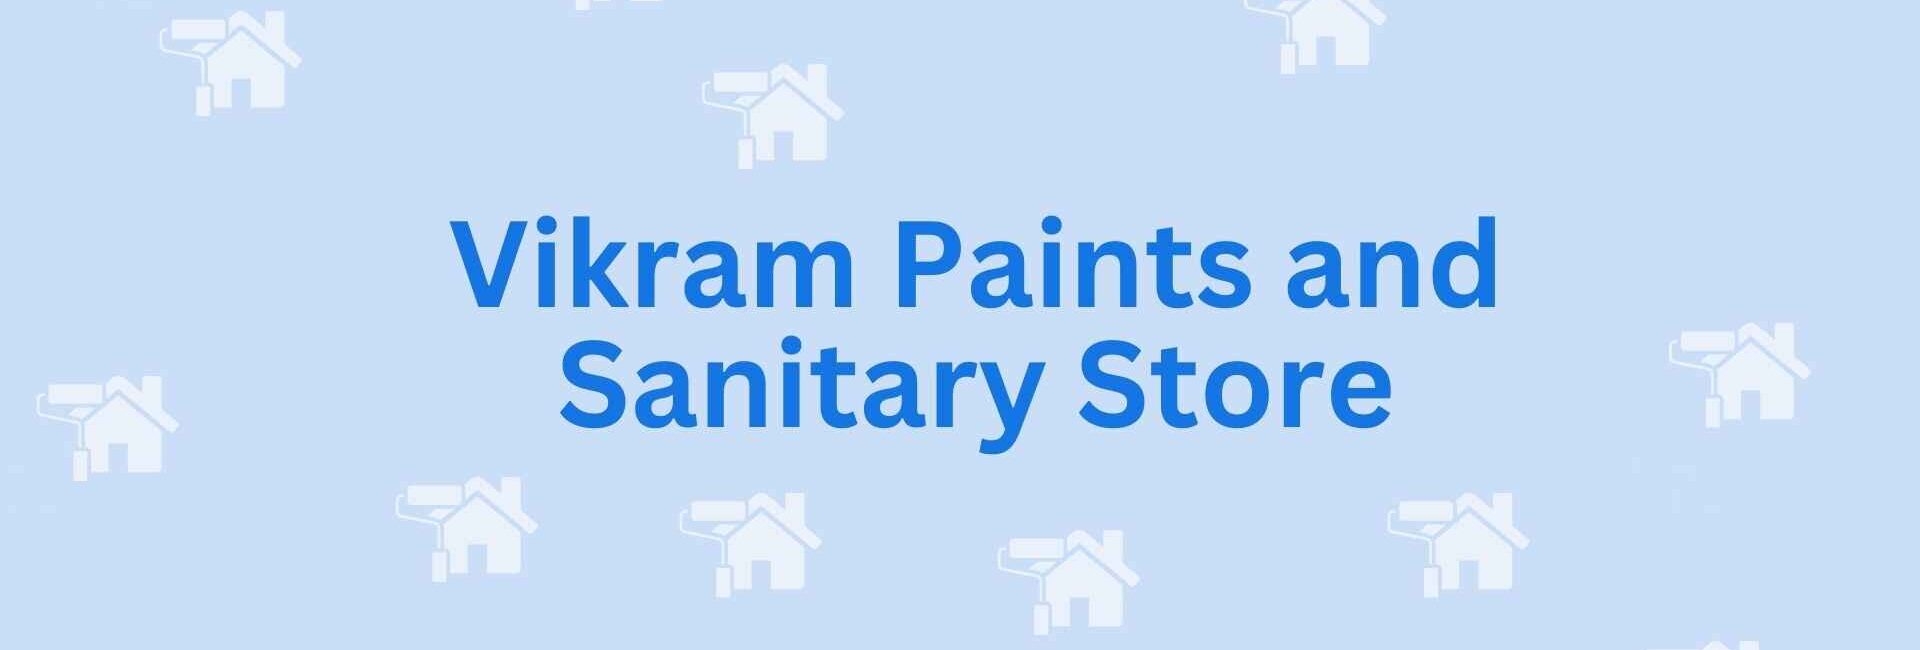 Vikram Paints and Sanitary Store - house painter in Noida